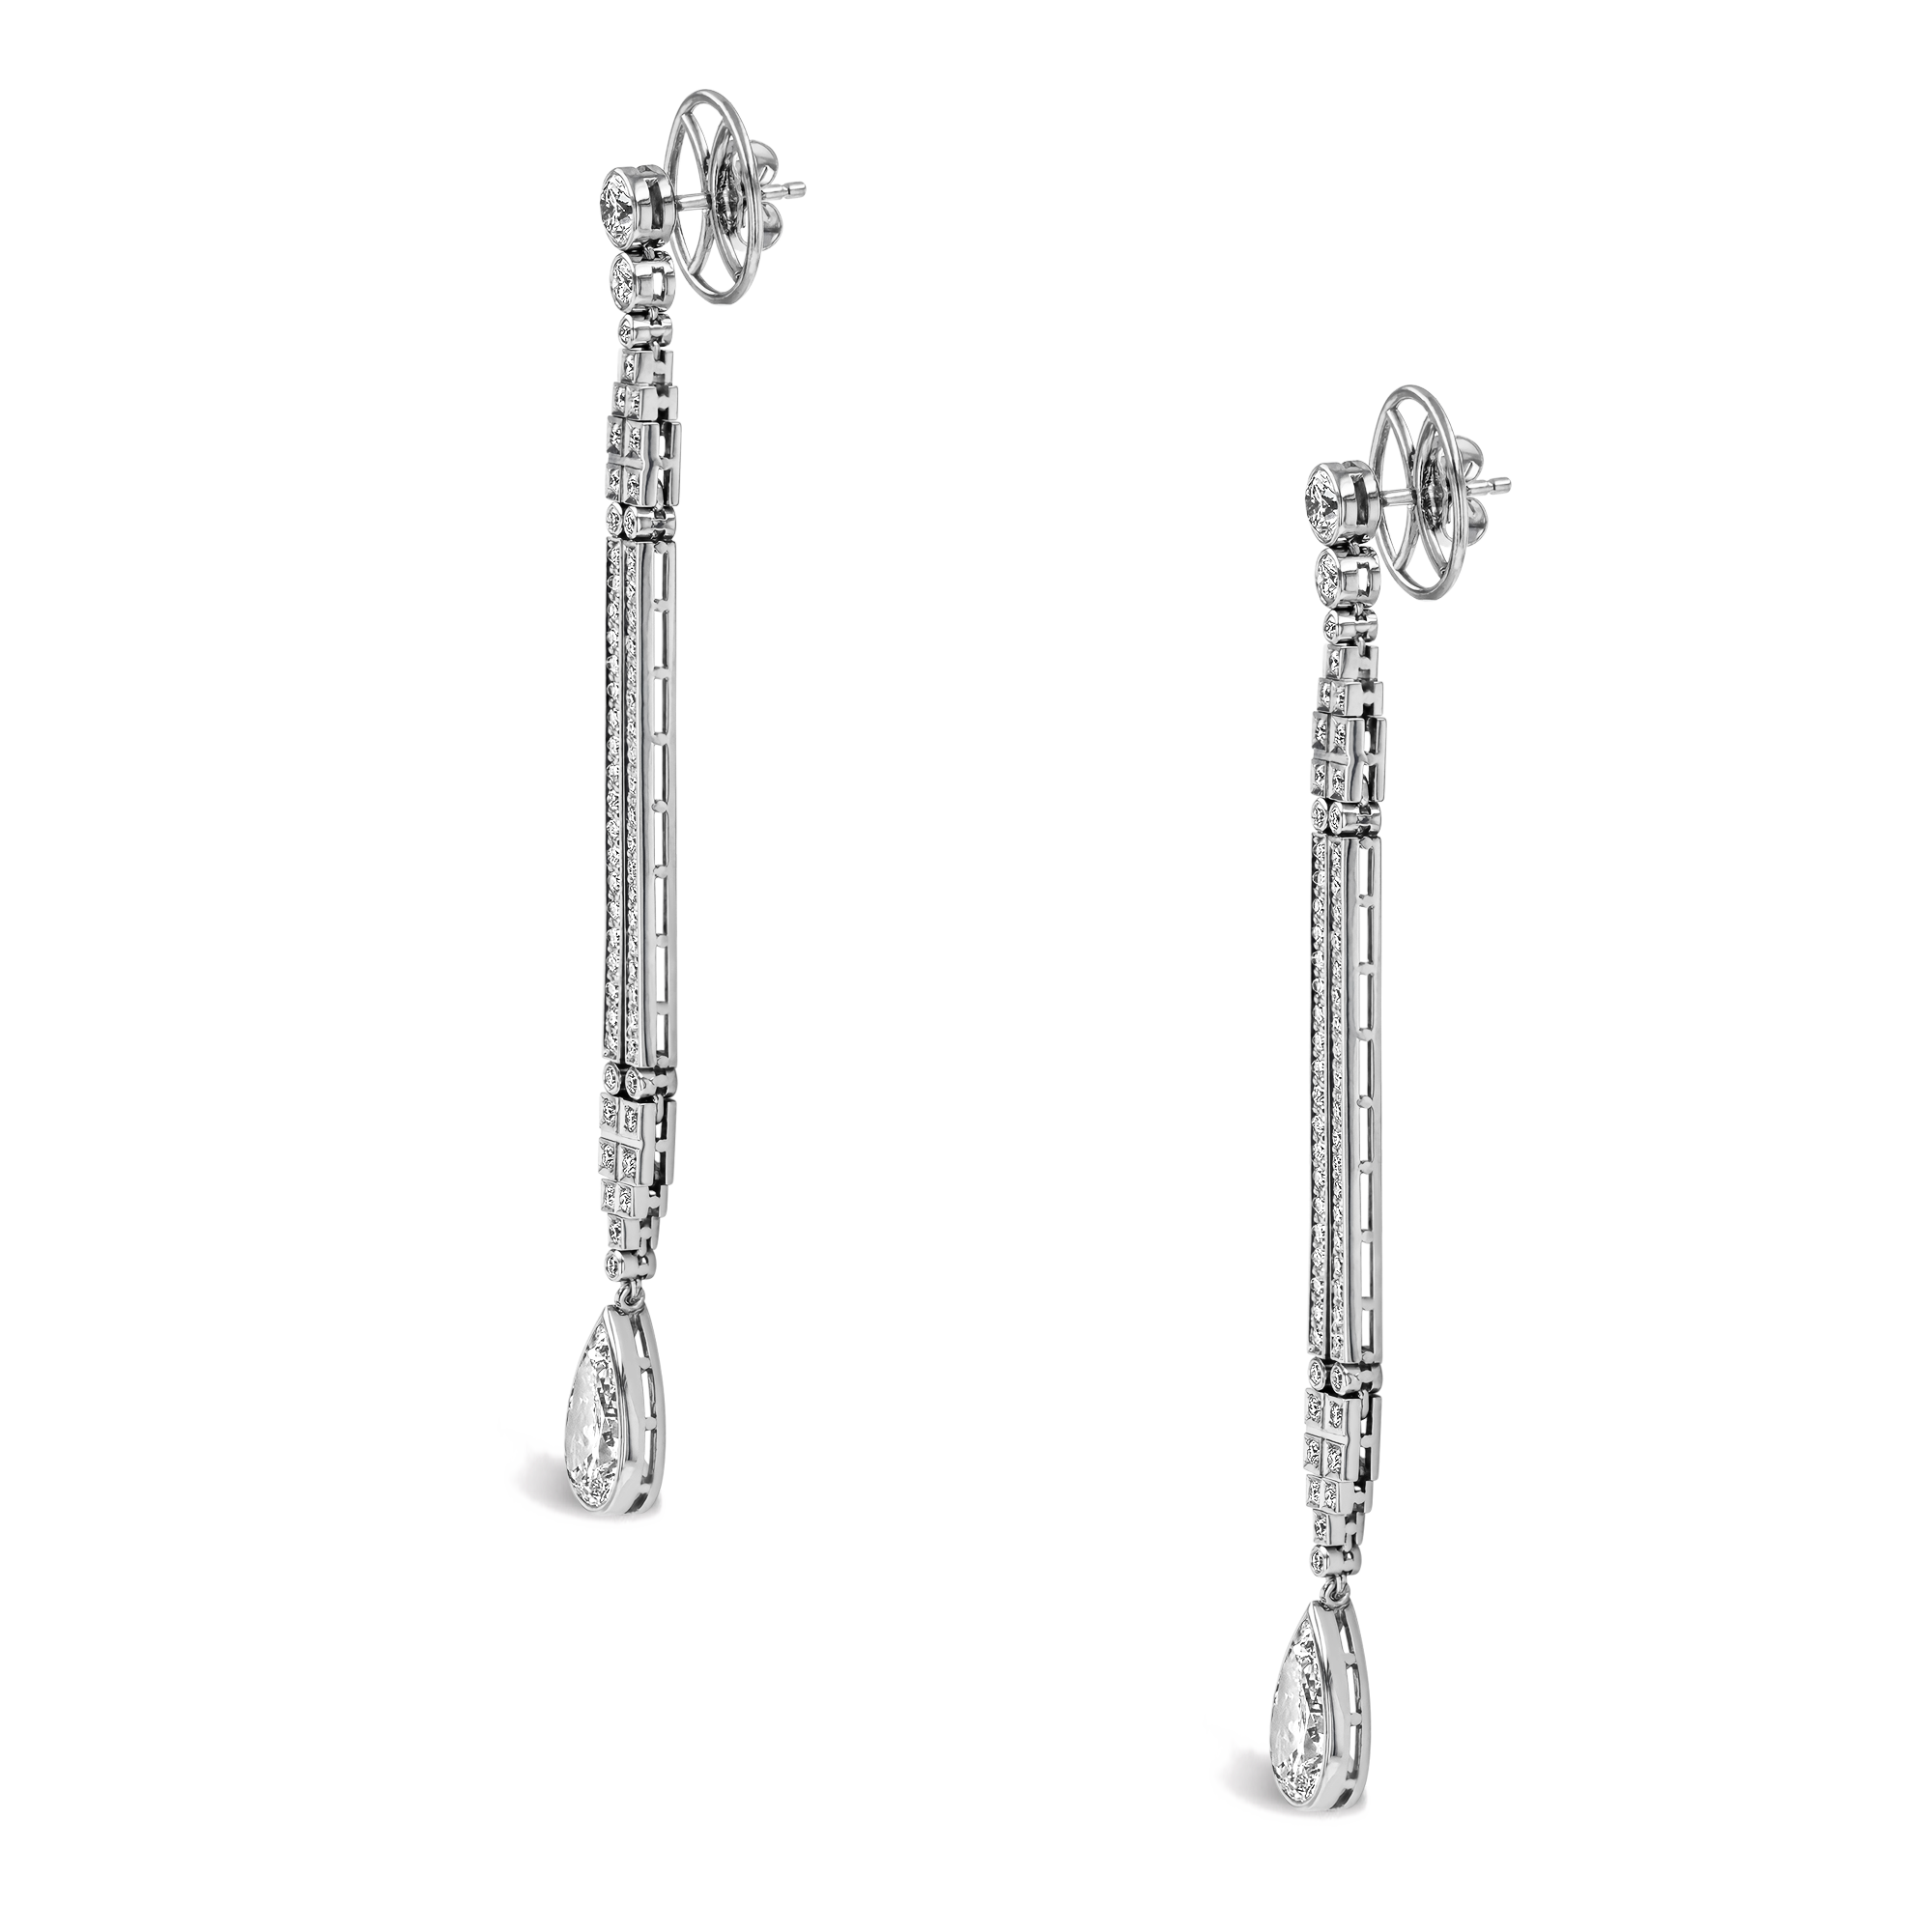 Masterpiece 4.03ct Articulated Diamond Drop Earrings Pearshape, Rubover Set_2